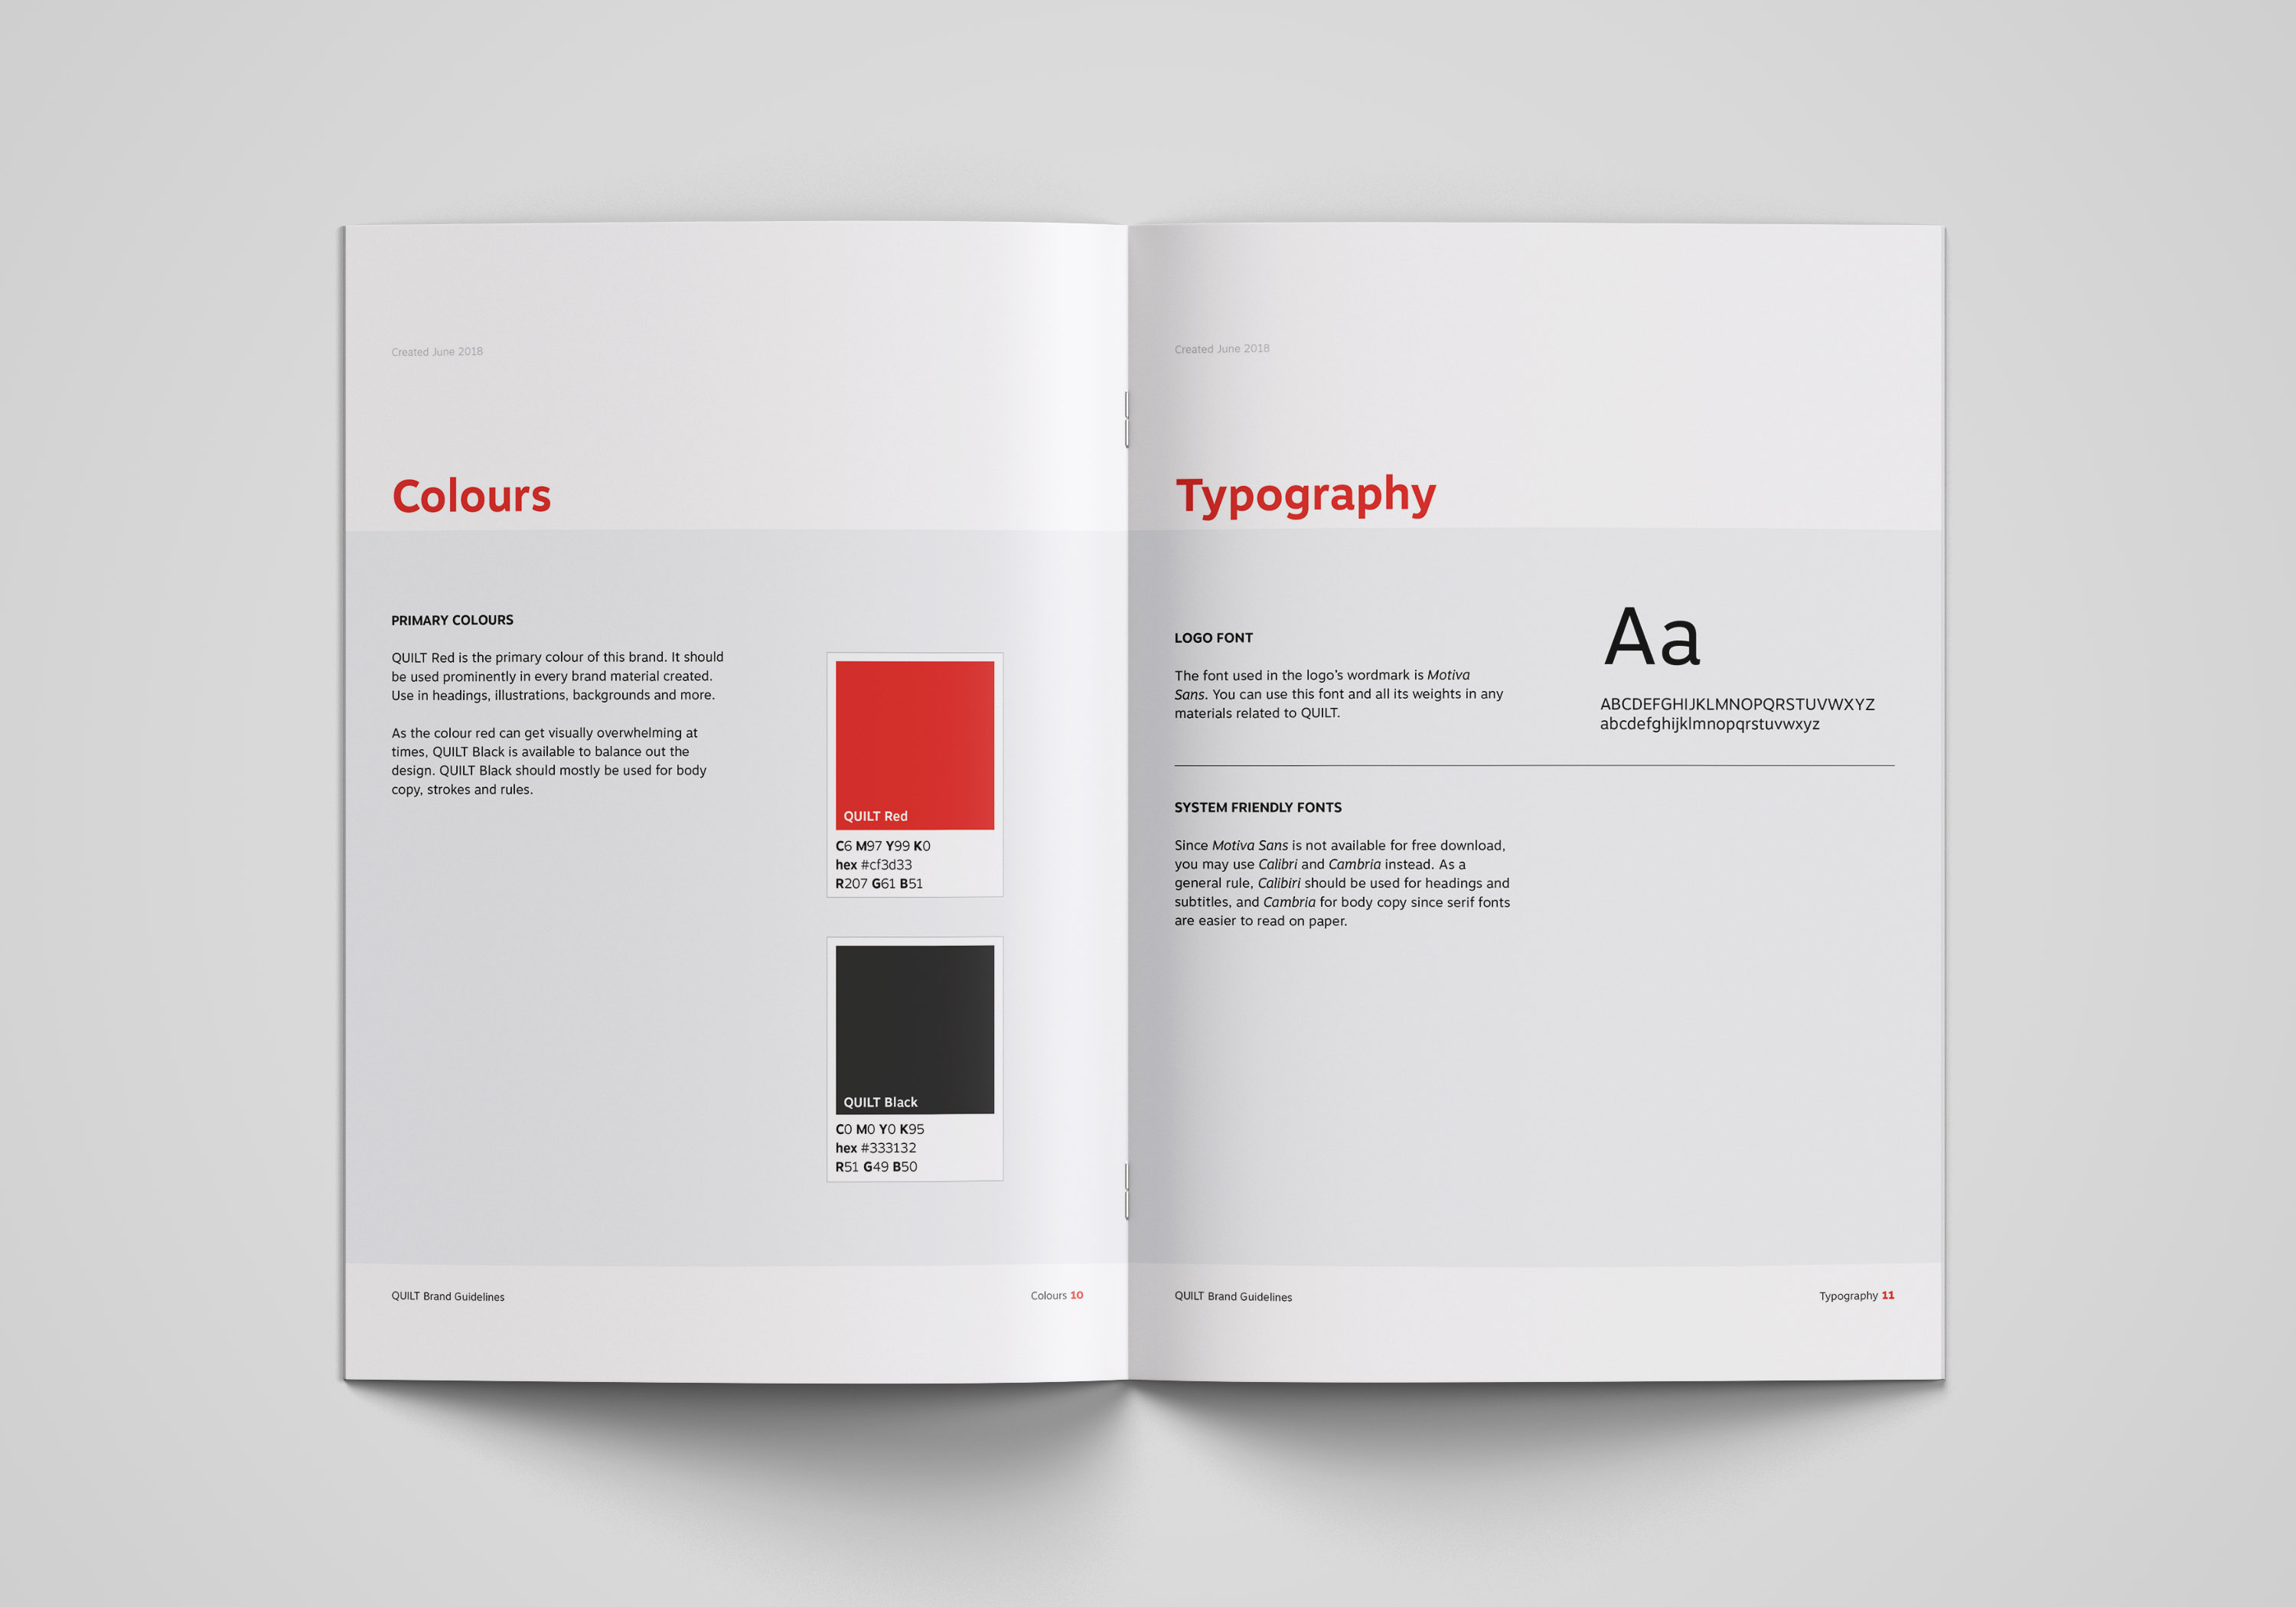 Branding guidelines spread about colours and typography.